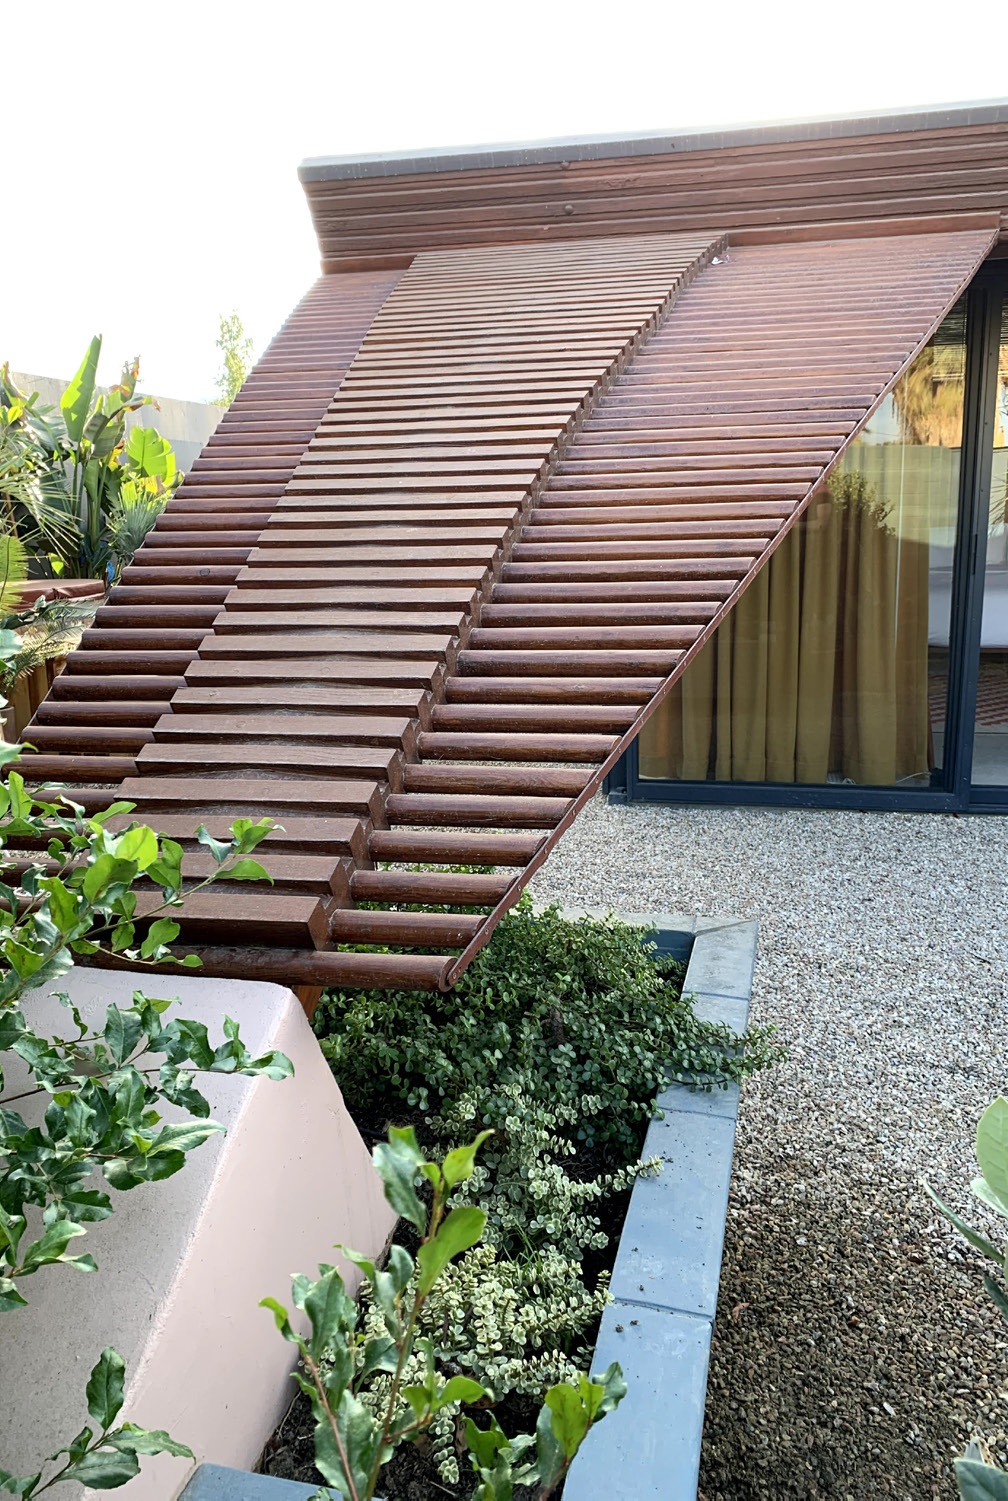 Rehabilitated wood trellis, extending off southern side of the roof, concrete planter and buttress